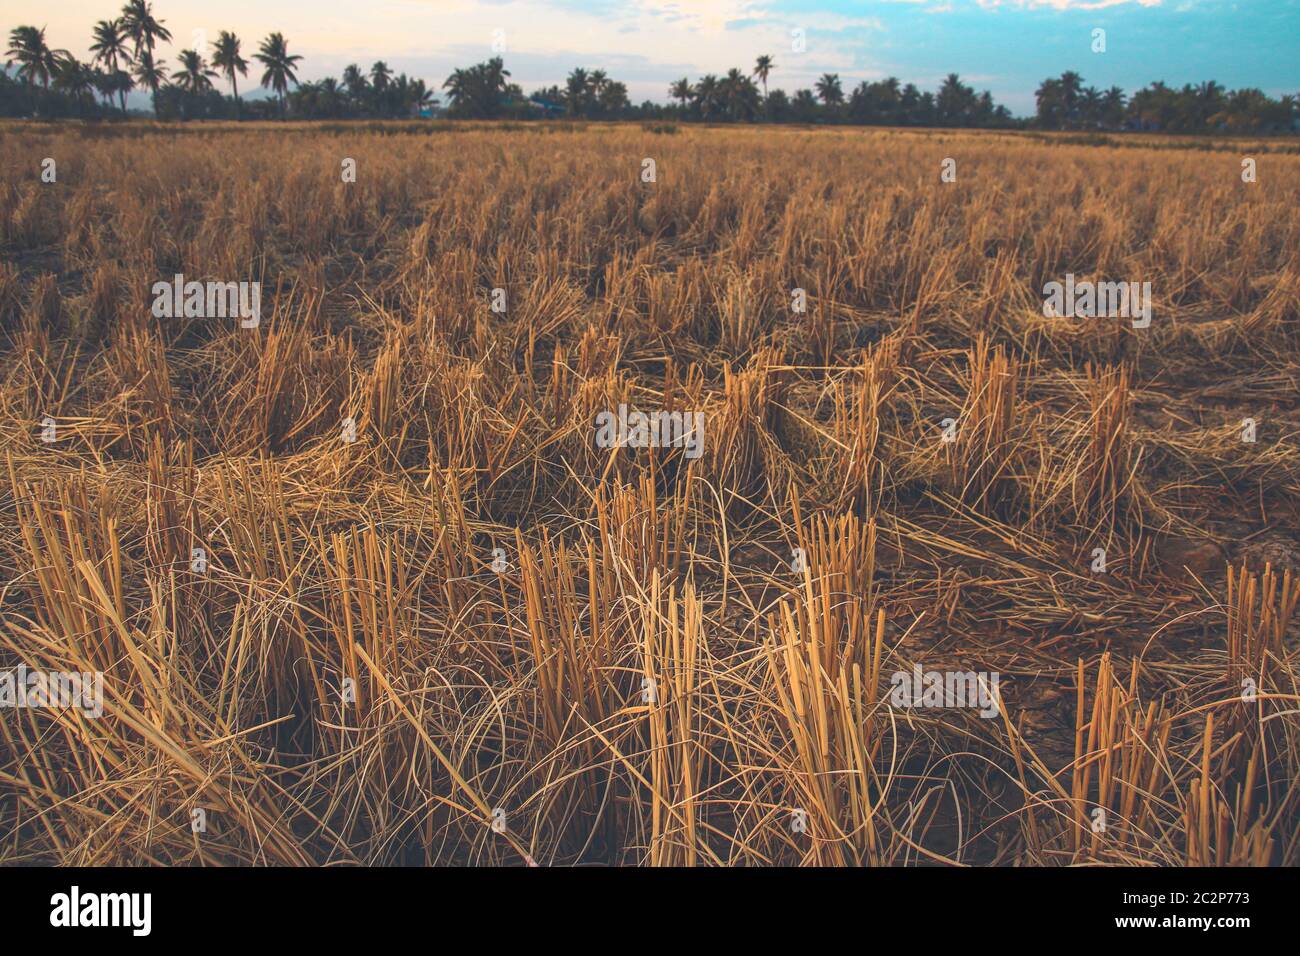 Rice fields devastated by prolonge drought due to climate change and global warming Stock Photo